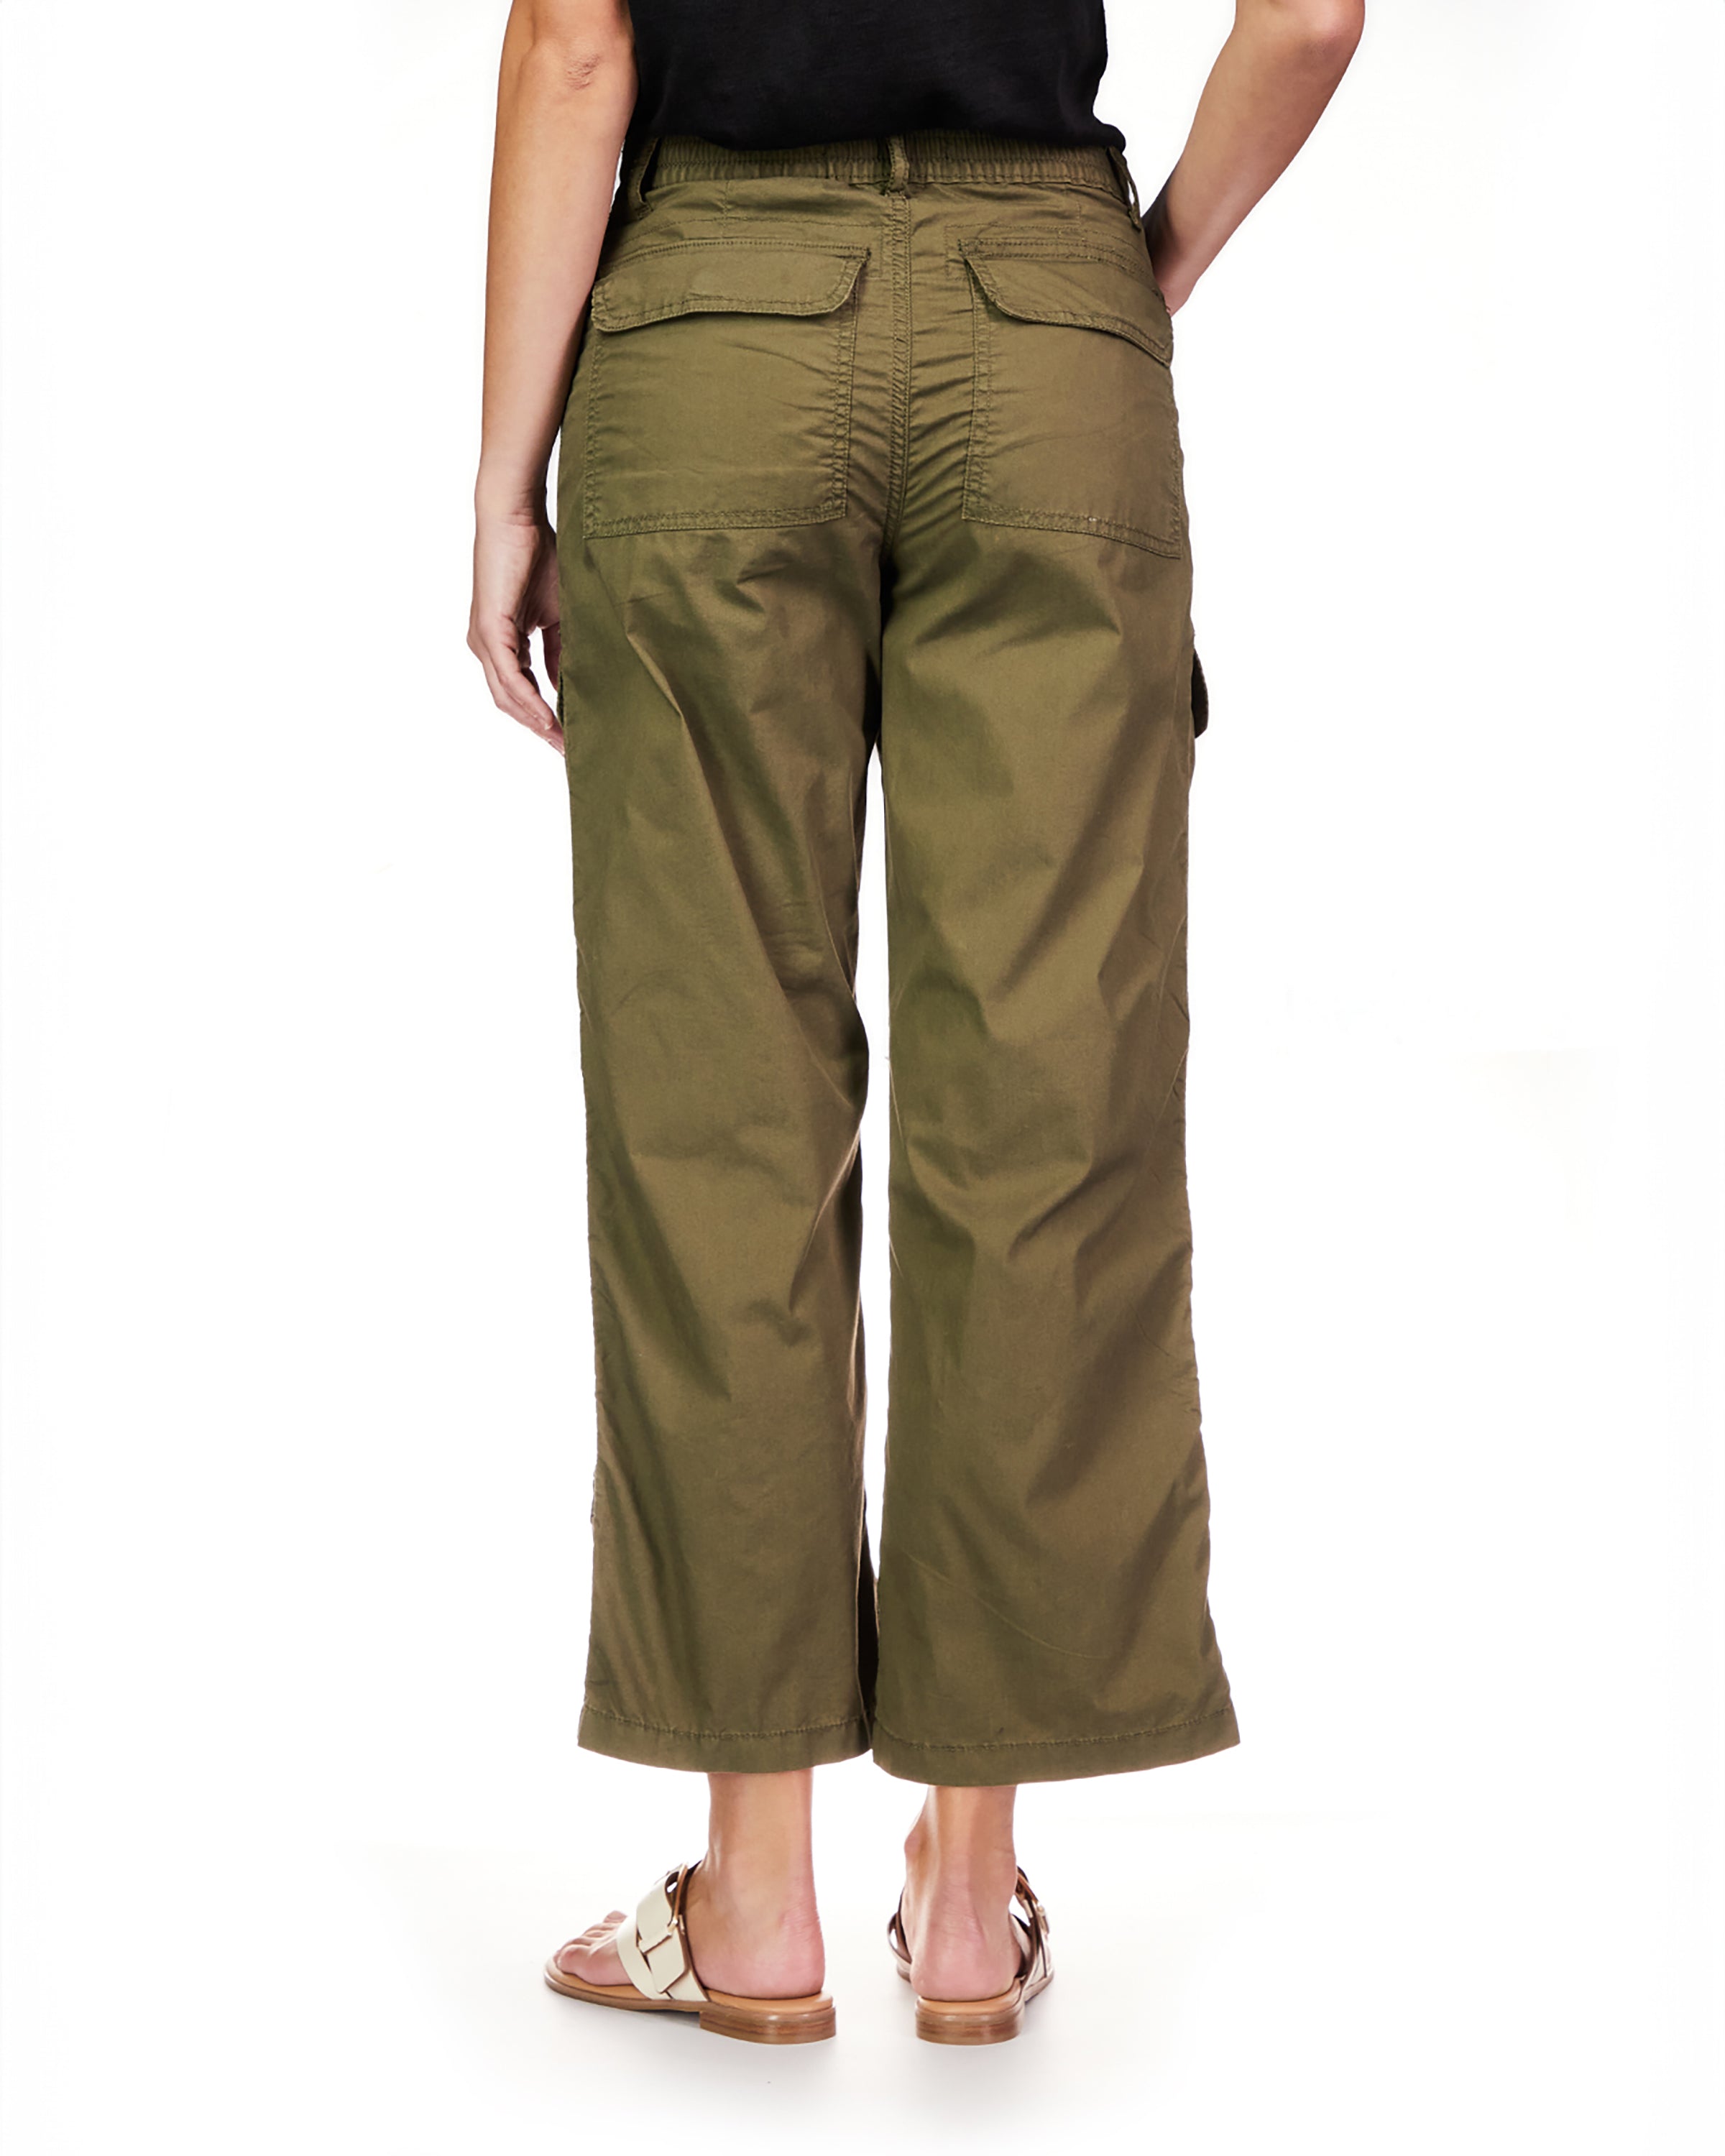 Sanctuary Cali Cargo Pant in Mossy Green